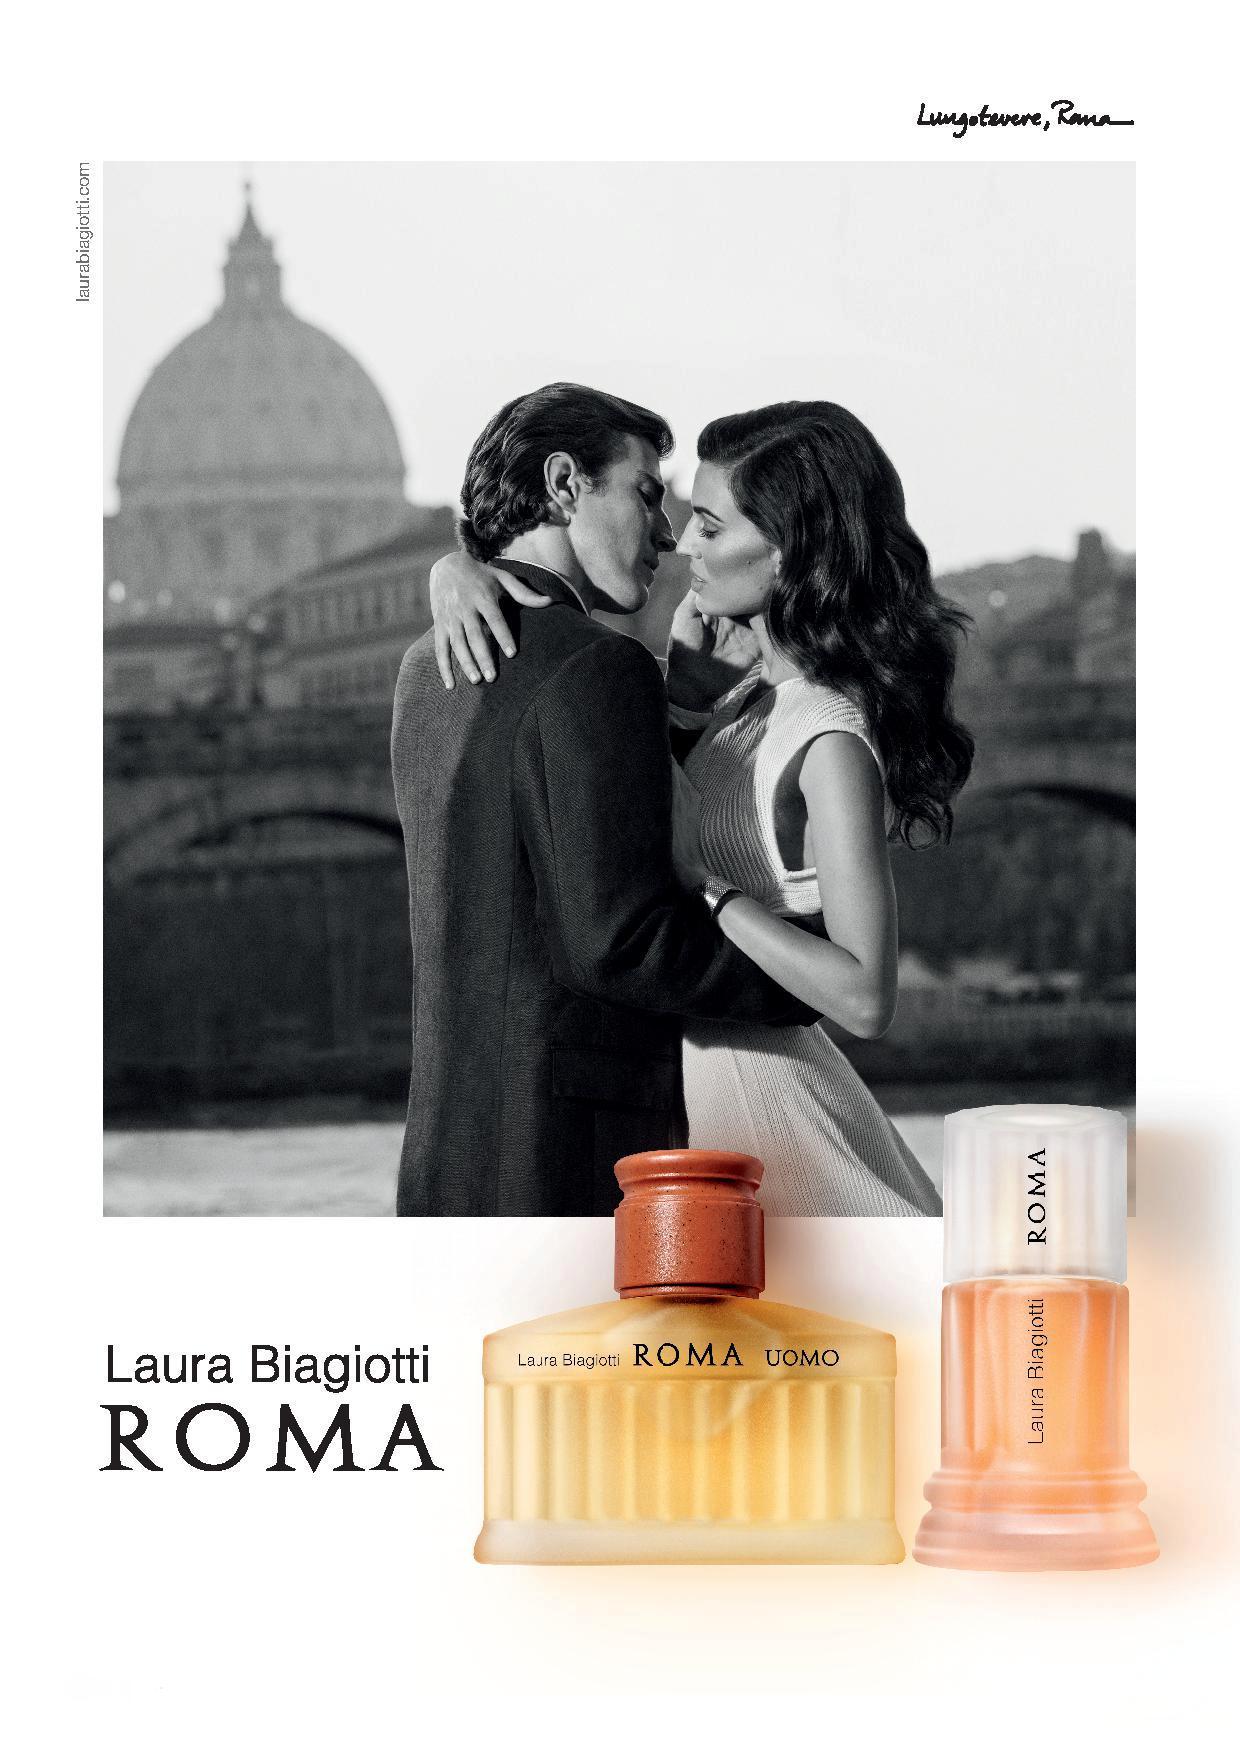 Oriol Elcacho Fronts Laura Biagiotti's Roma Fragrance Campaign